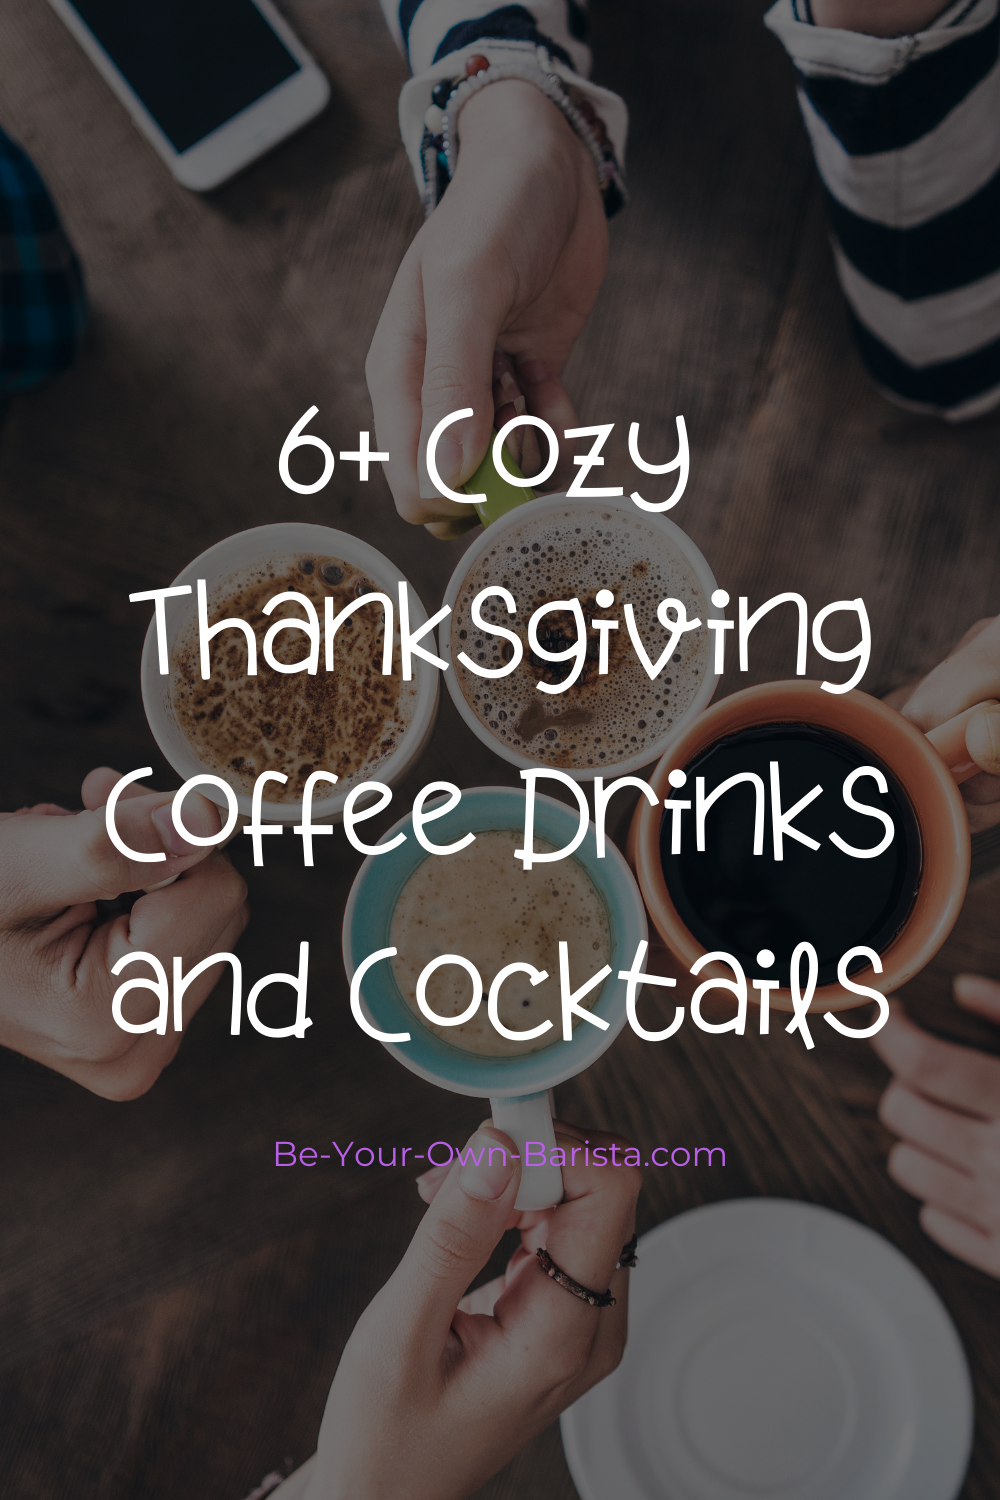 6+ Cozy Thanksgiving Coffee Drinks and Cocktails